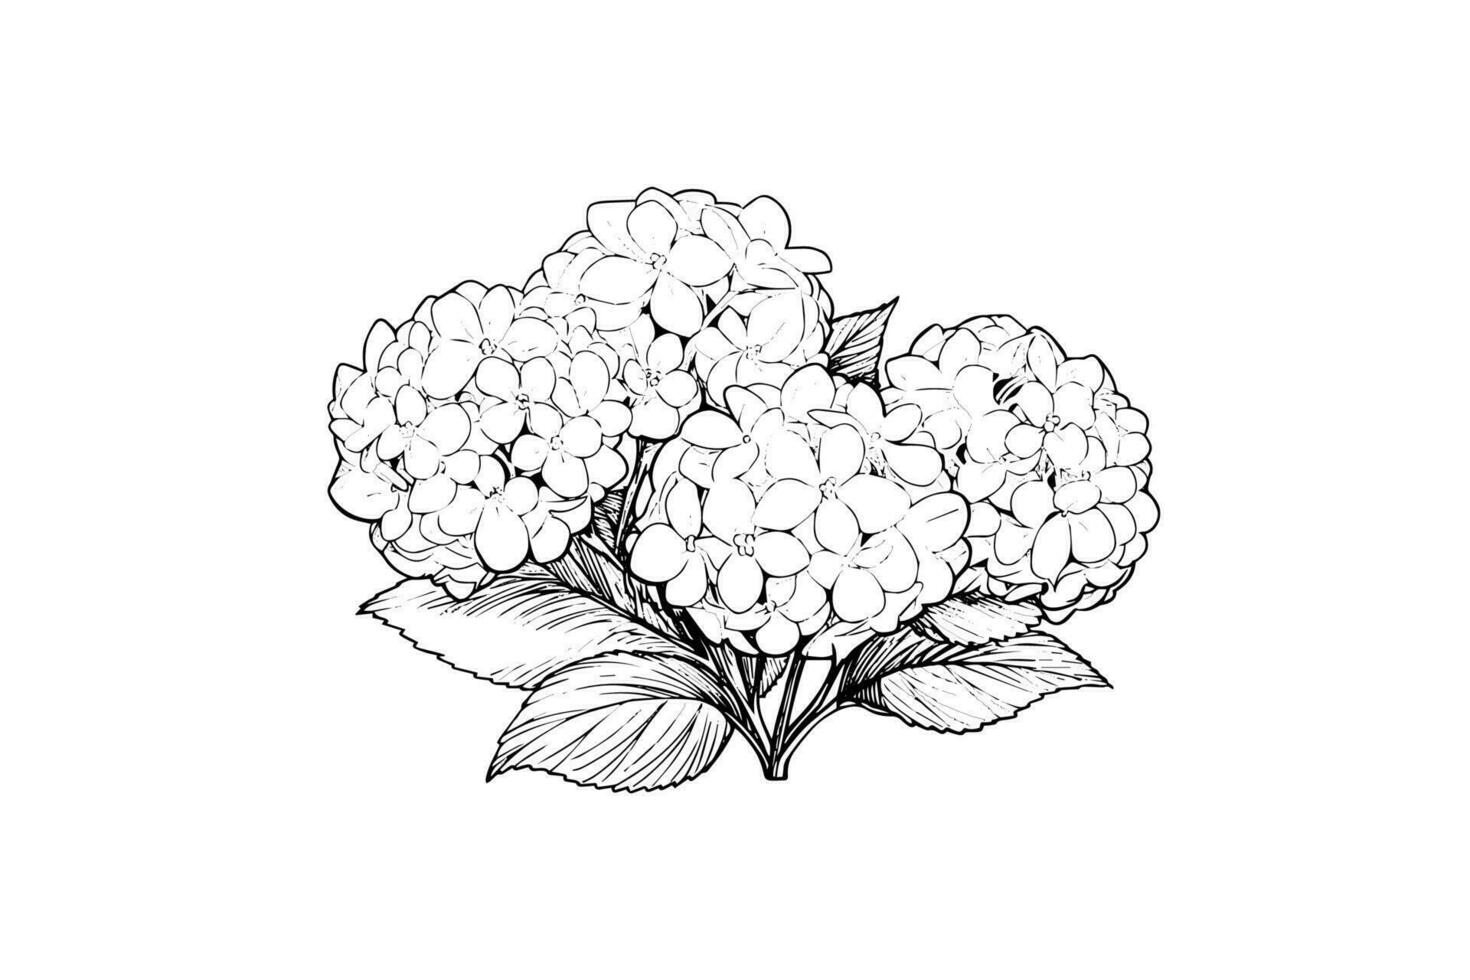 Hand drawn ink sketch hydrangea flowers. Vector illustration in engraving style.